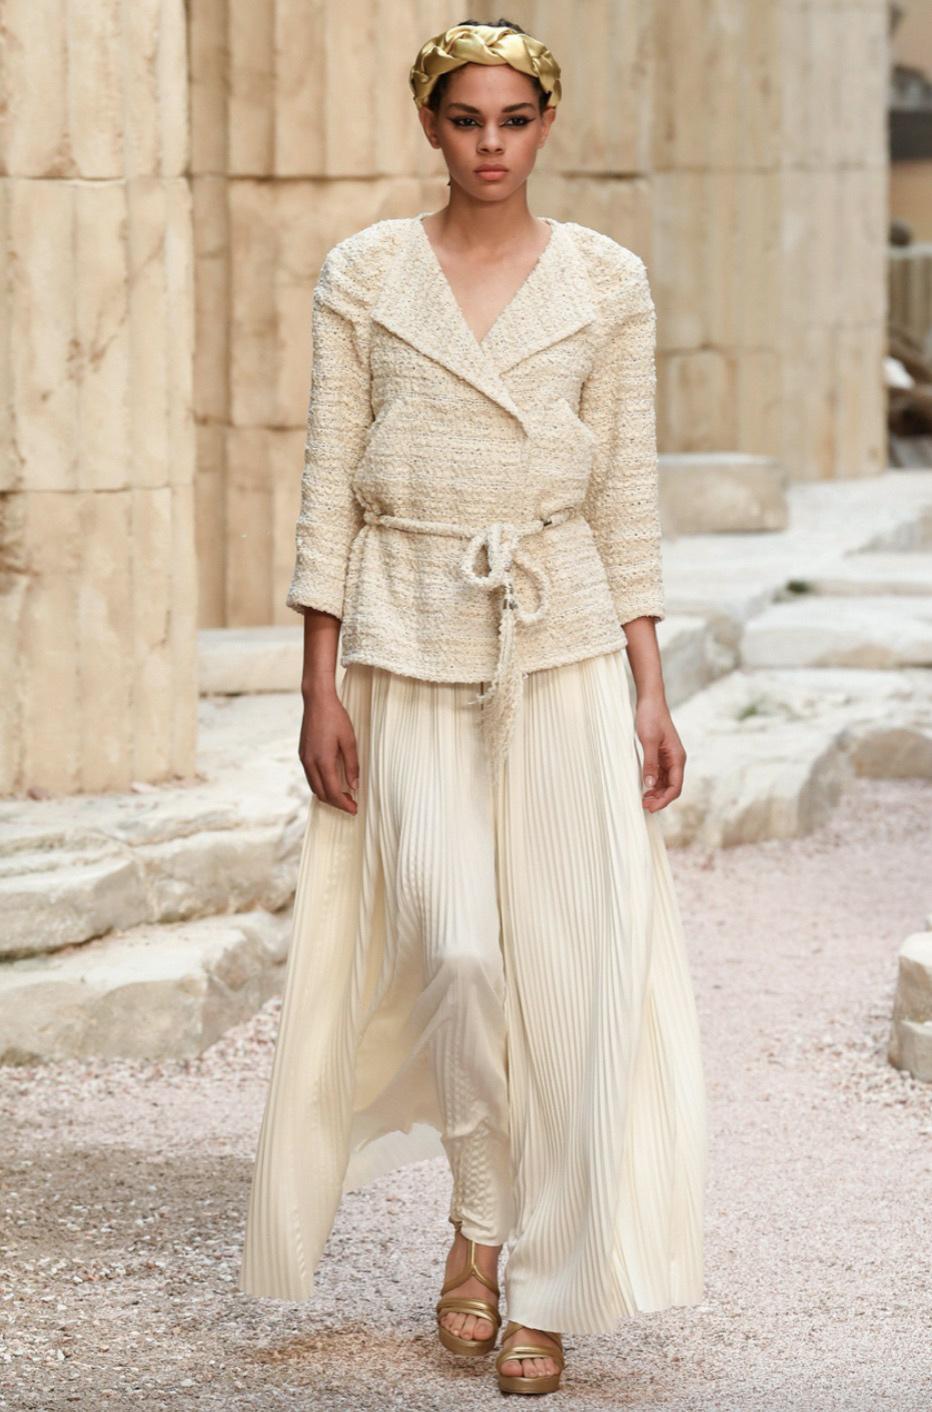 Presenting a breathtaking pair of pleated palazzo pants from Chanel's Cruise 2018 collection dedicated to Greece. These pants come in a stunning ivory white/champagne shade, displaying impeccable pleats that create a graceful and fluid silhouette.